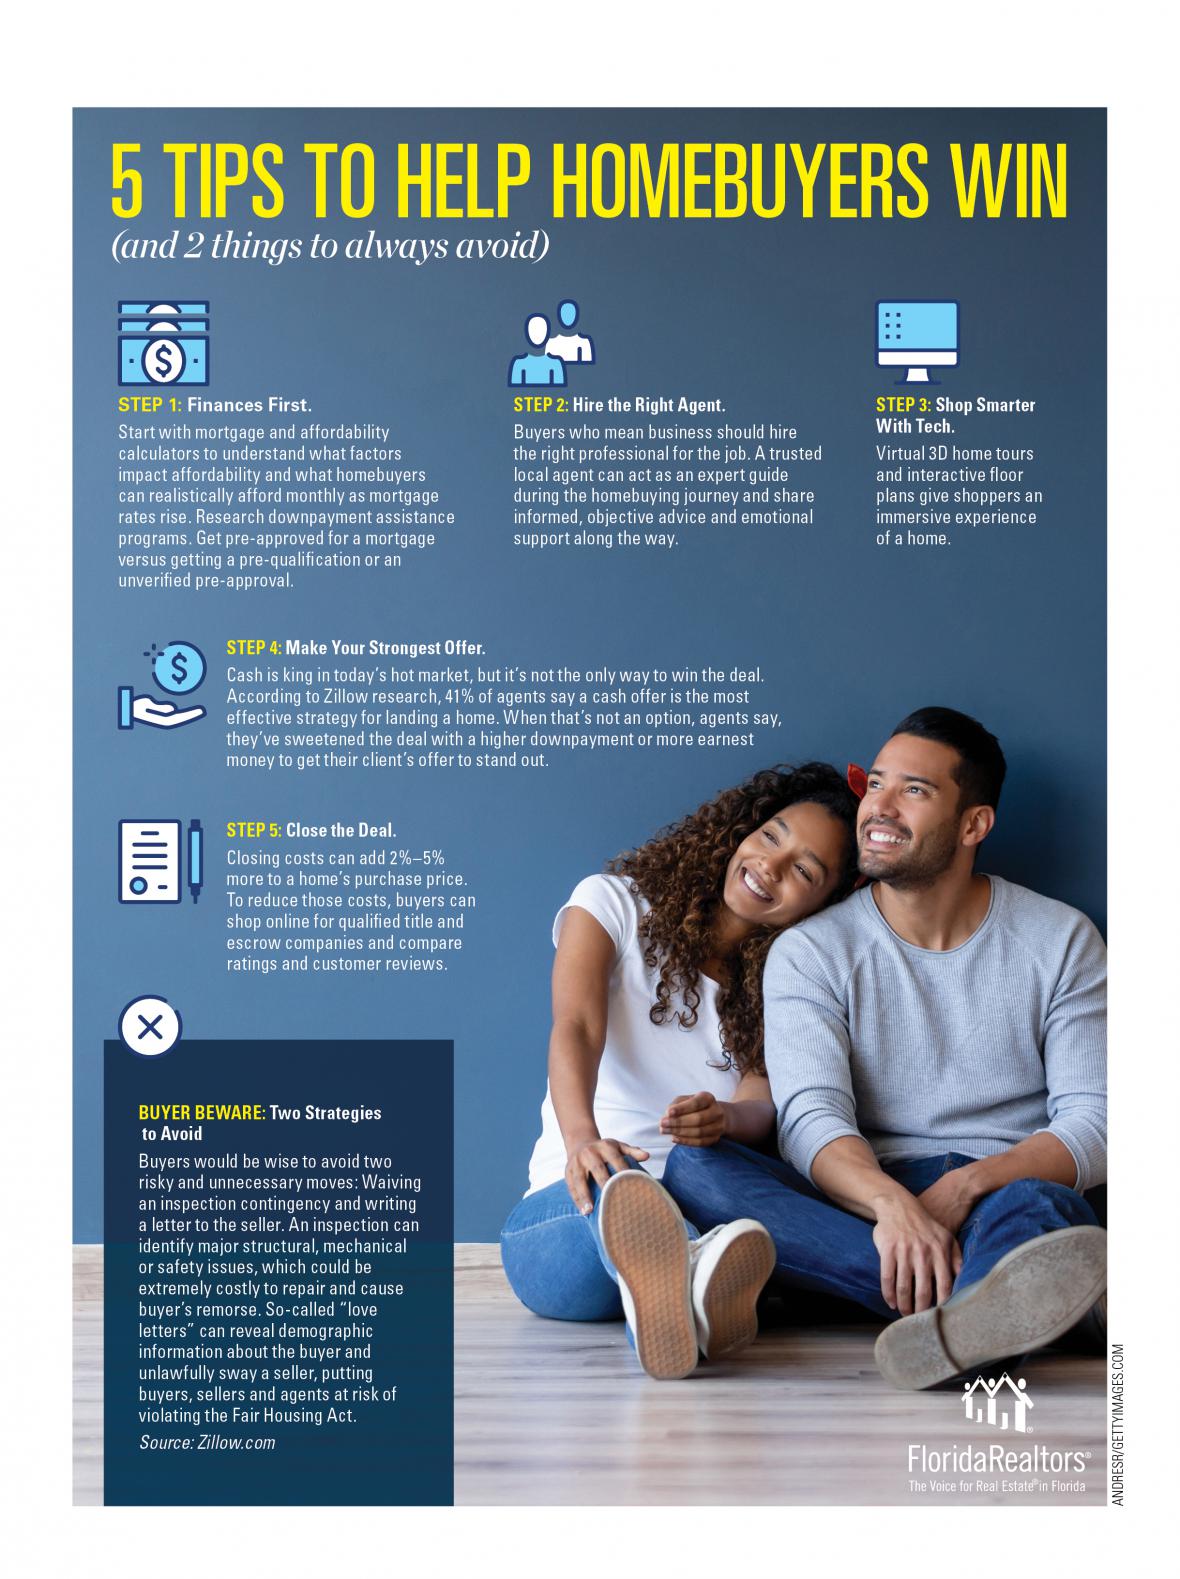 5 Tips to Help Homebuyers win infographic